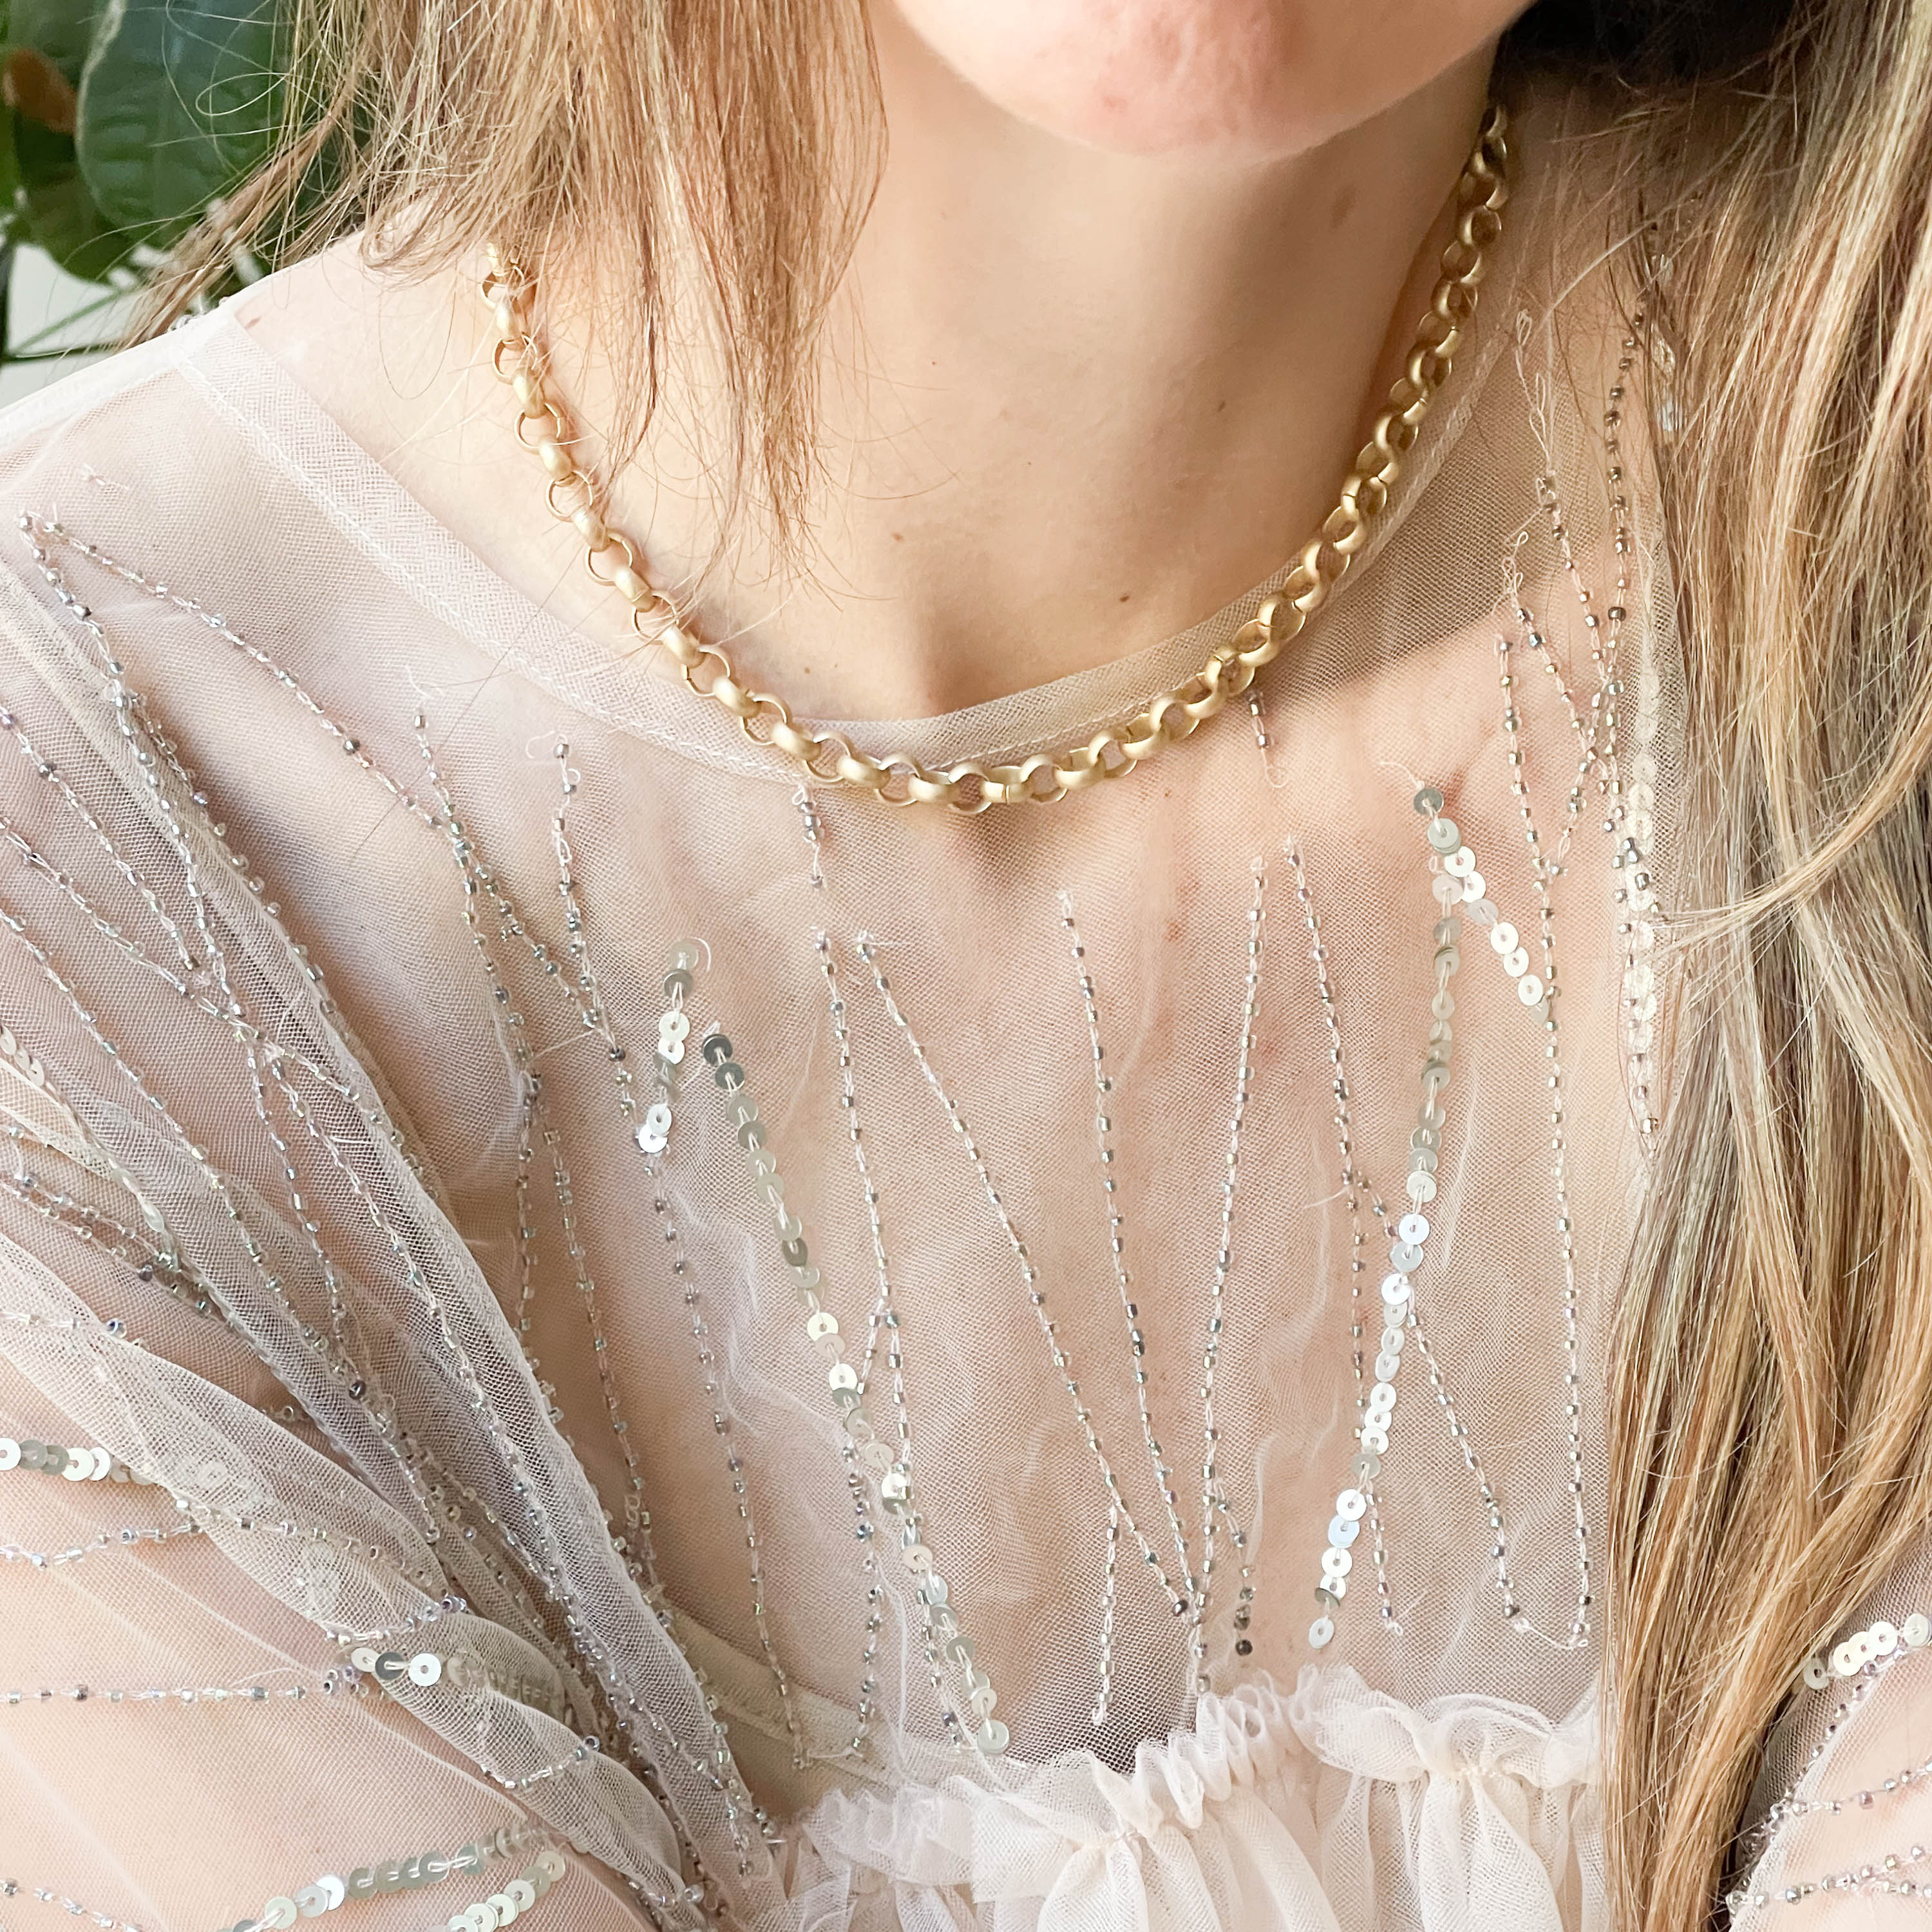 How to Wear and Style Latest Chunky Gold Necklace?